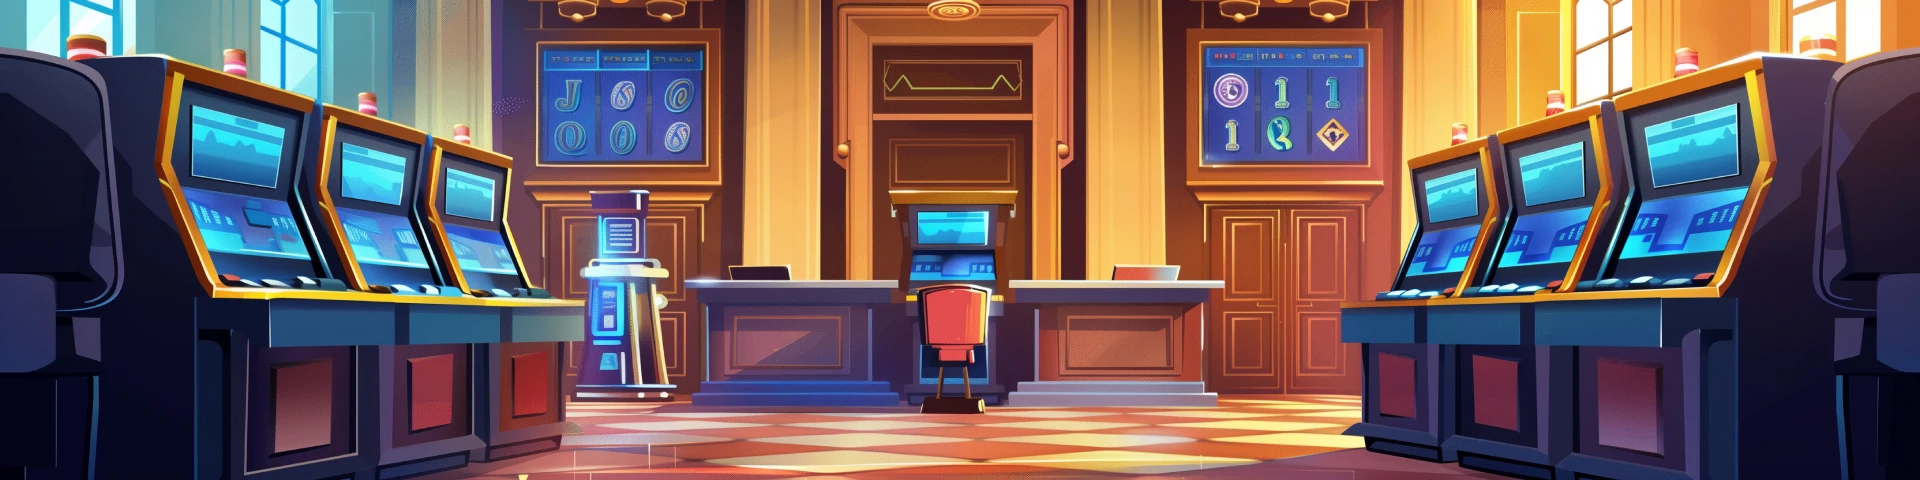 Courthouse with slot machines cartoon banner